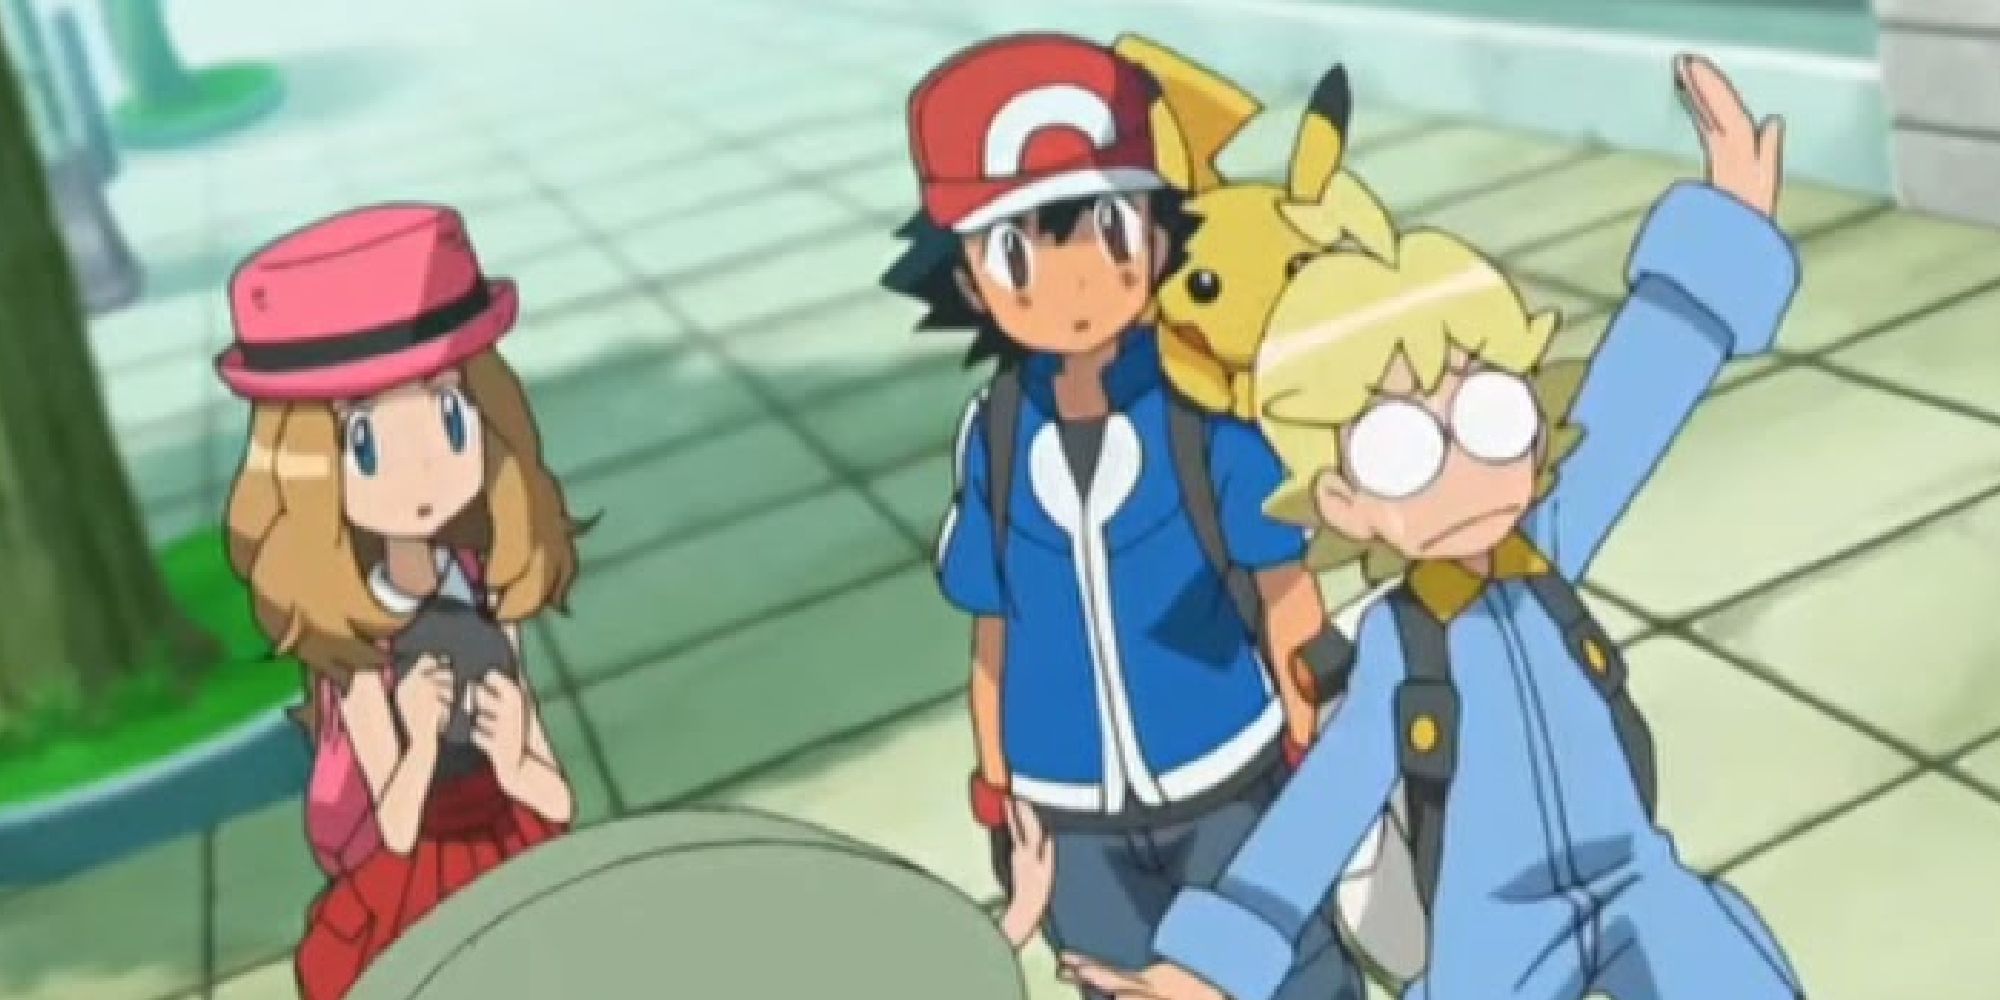 Clemont awestruck after meeting his dad with Ash and Serena